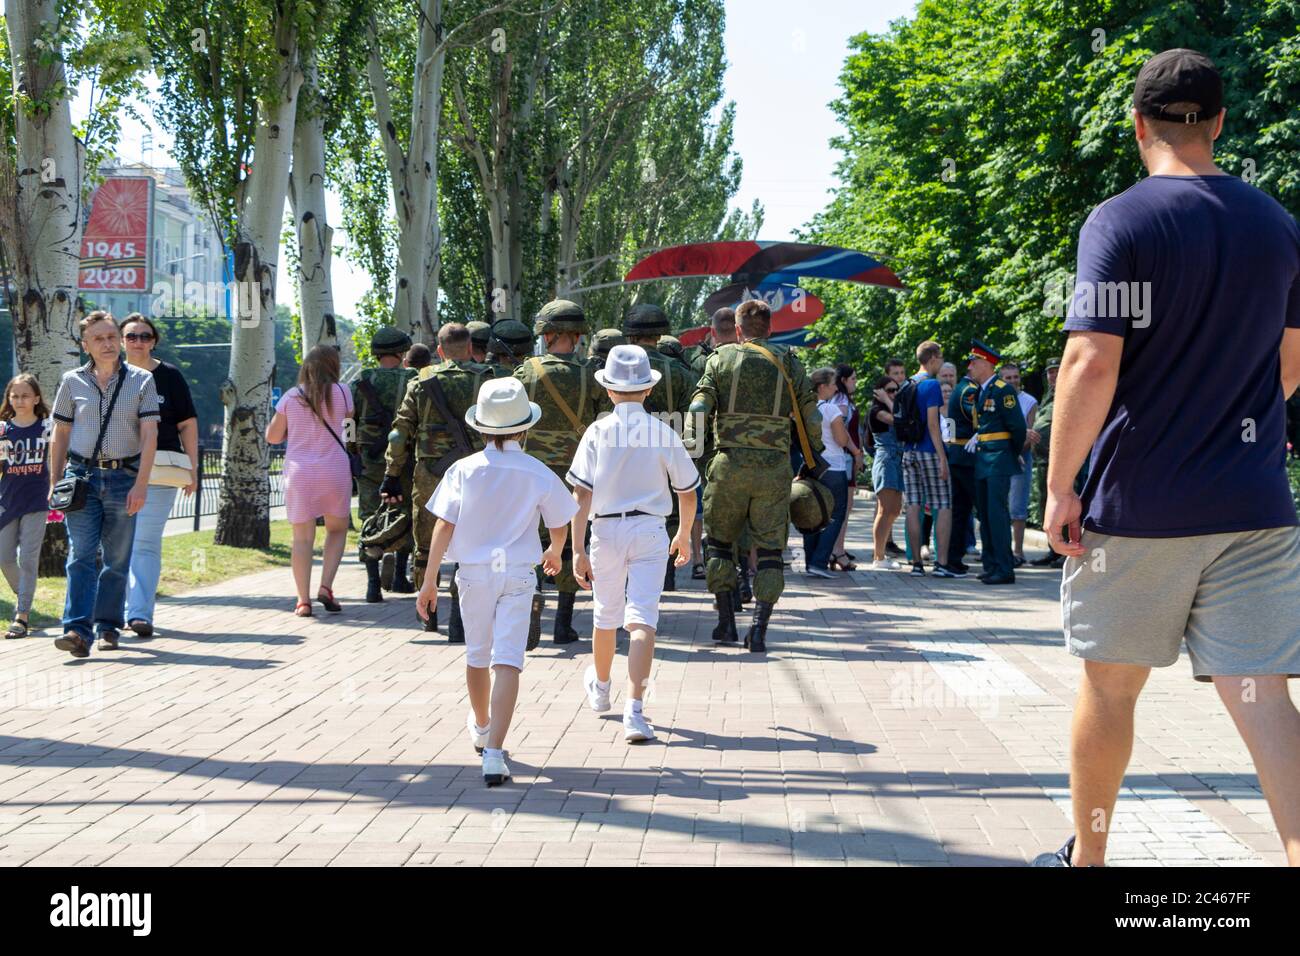 Donetsk, Donetsk People Republic, Ukraine - June 24, 2020: Two boys in white festive clothes and hats go after the military after the Victory Day para Stock Photo